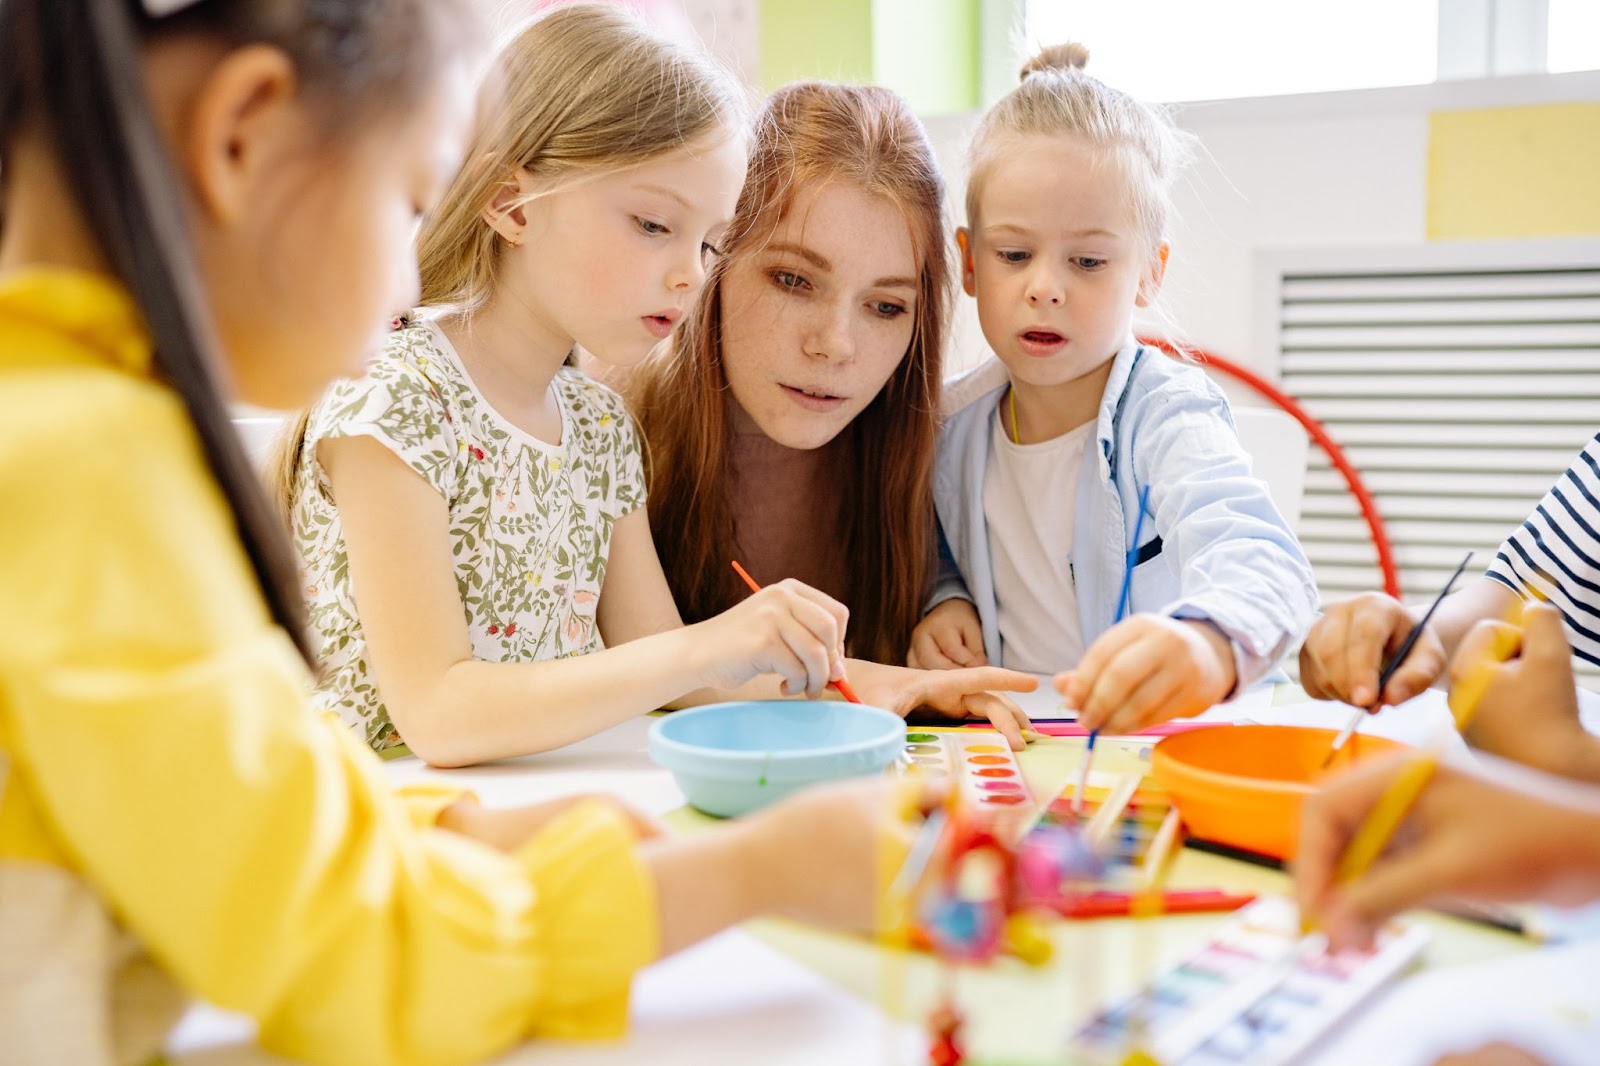 Is the Long Day Care Growing? Childcare Industry Trends and What You Need to Know